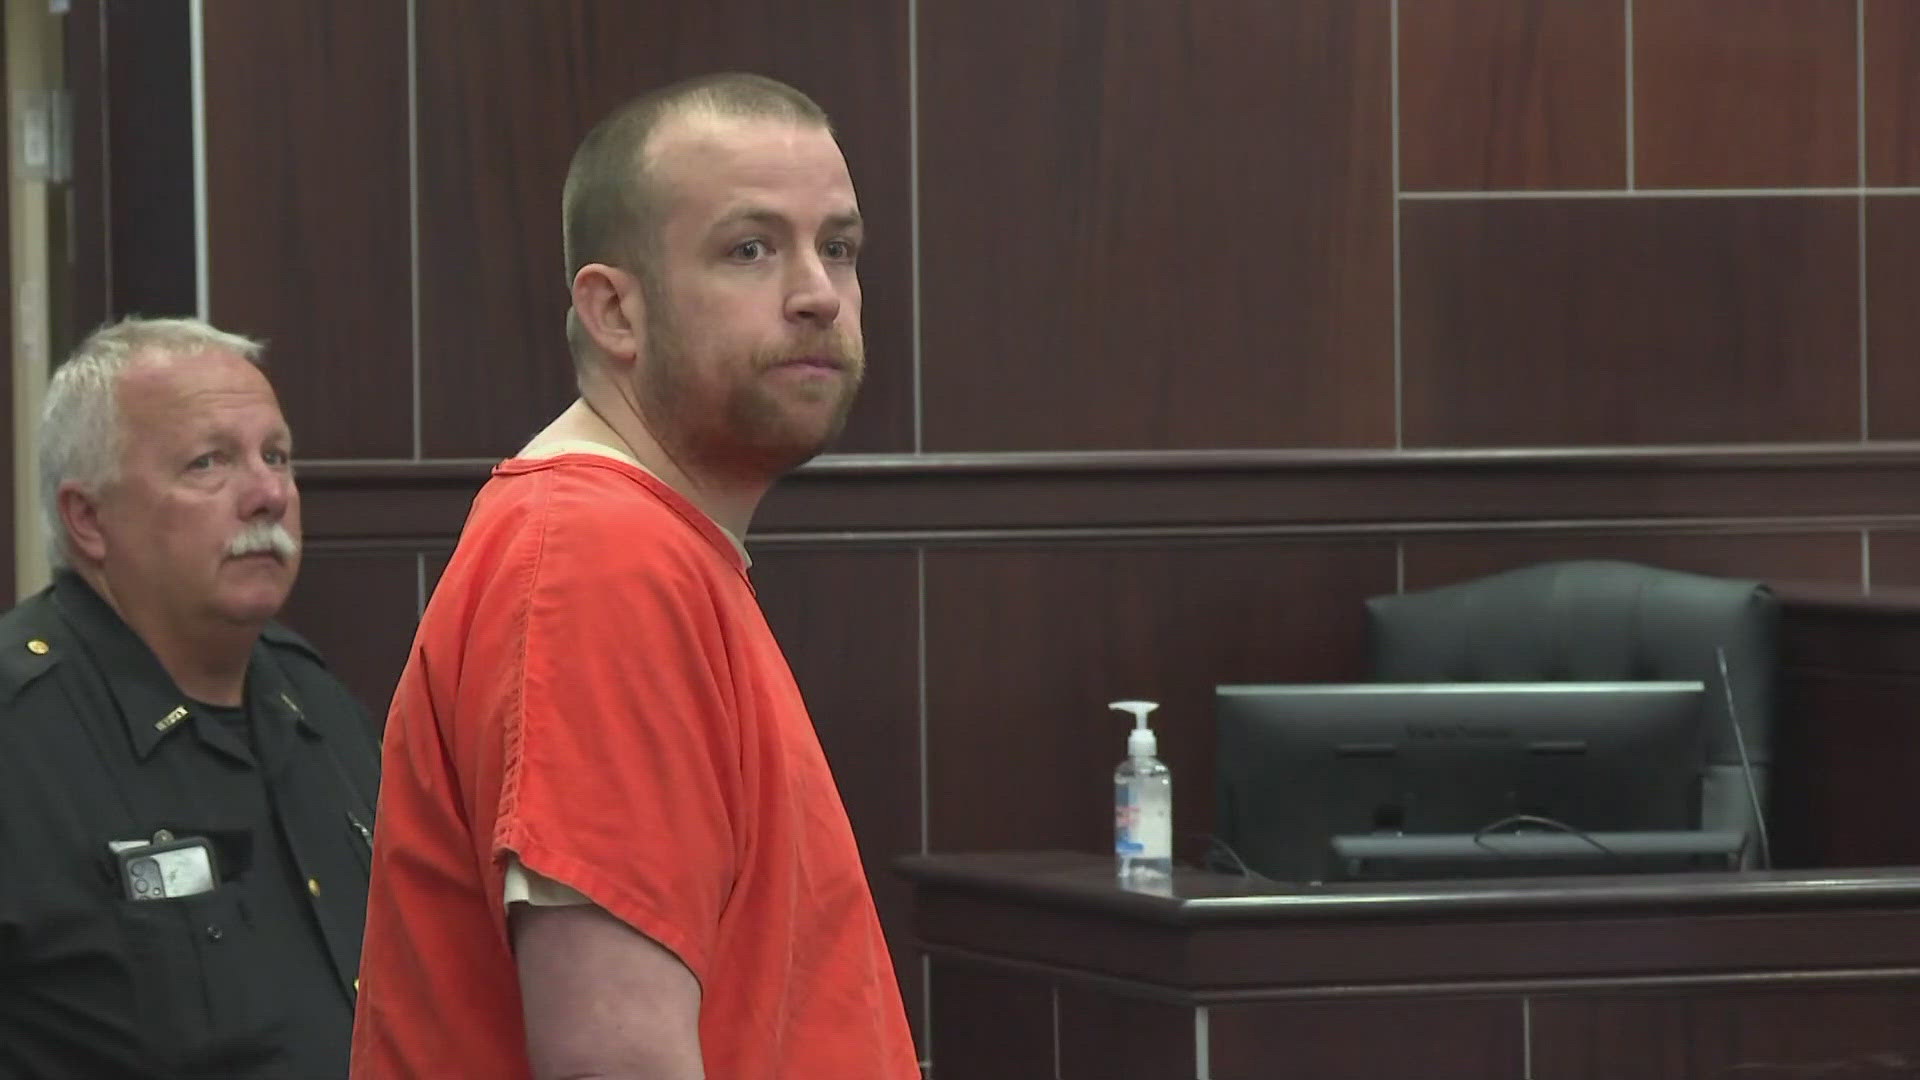 Ziegler's guilty plea in the case came in early April just days before his trial was slated to start.